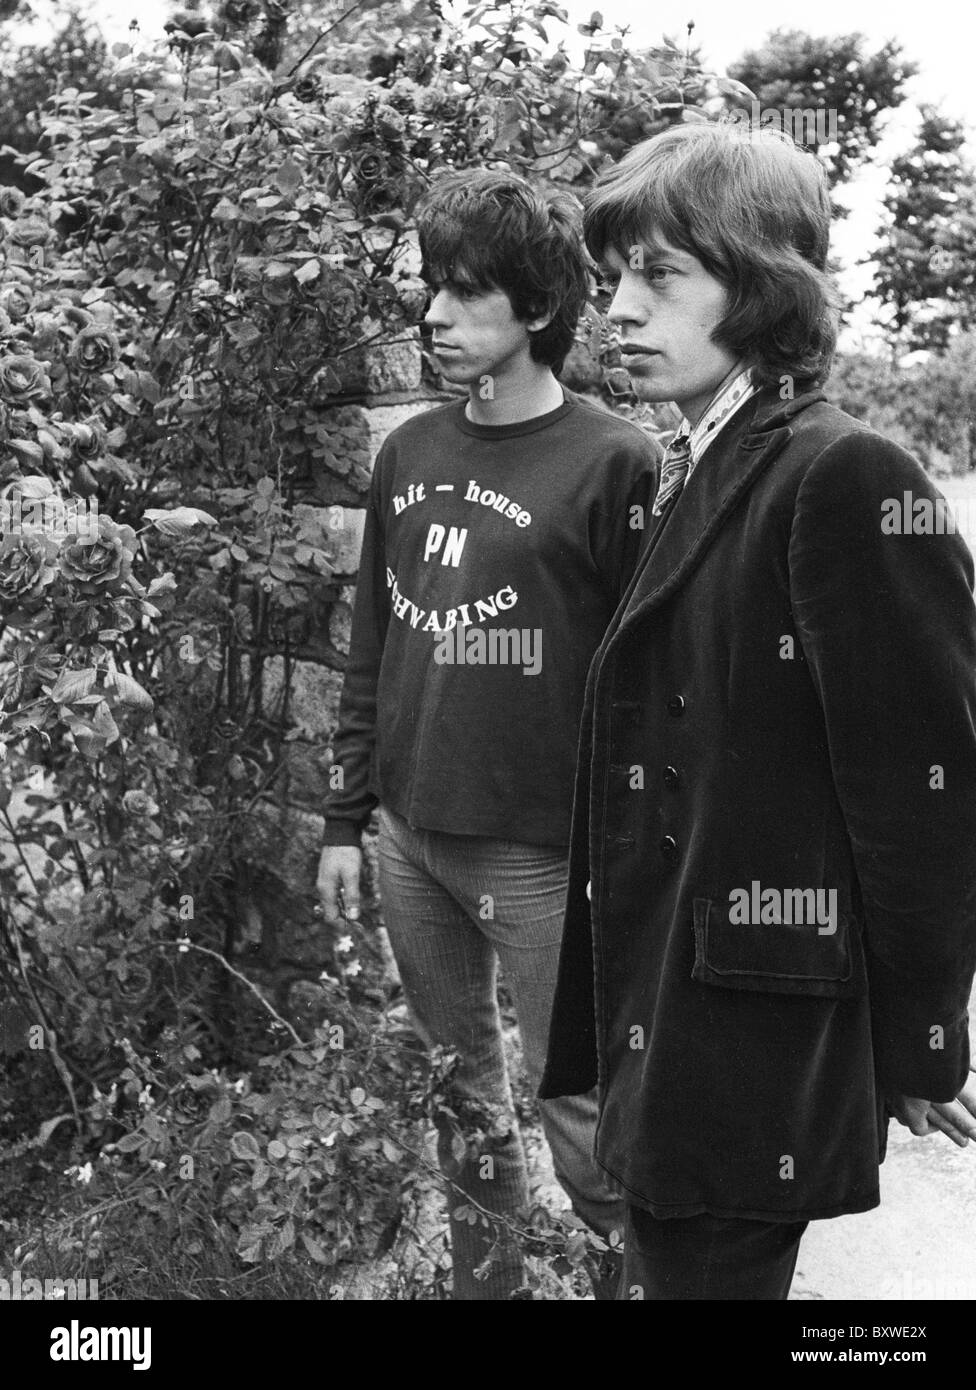 Keith Richards and Mick Jagger exclusive image from 1967 by David Cole in the gardens at Redlands, Richards' Sussex home. Stock Photo